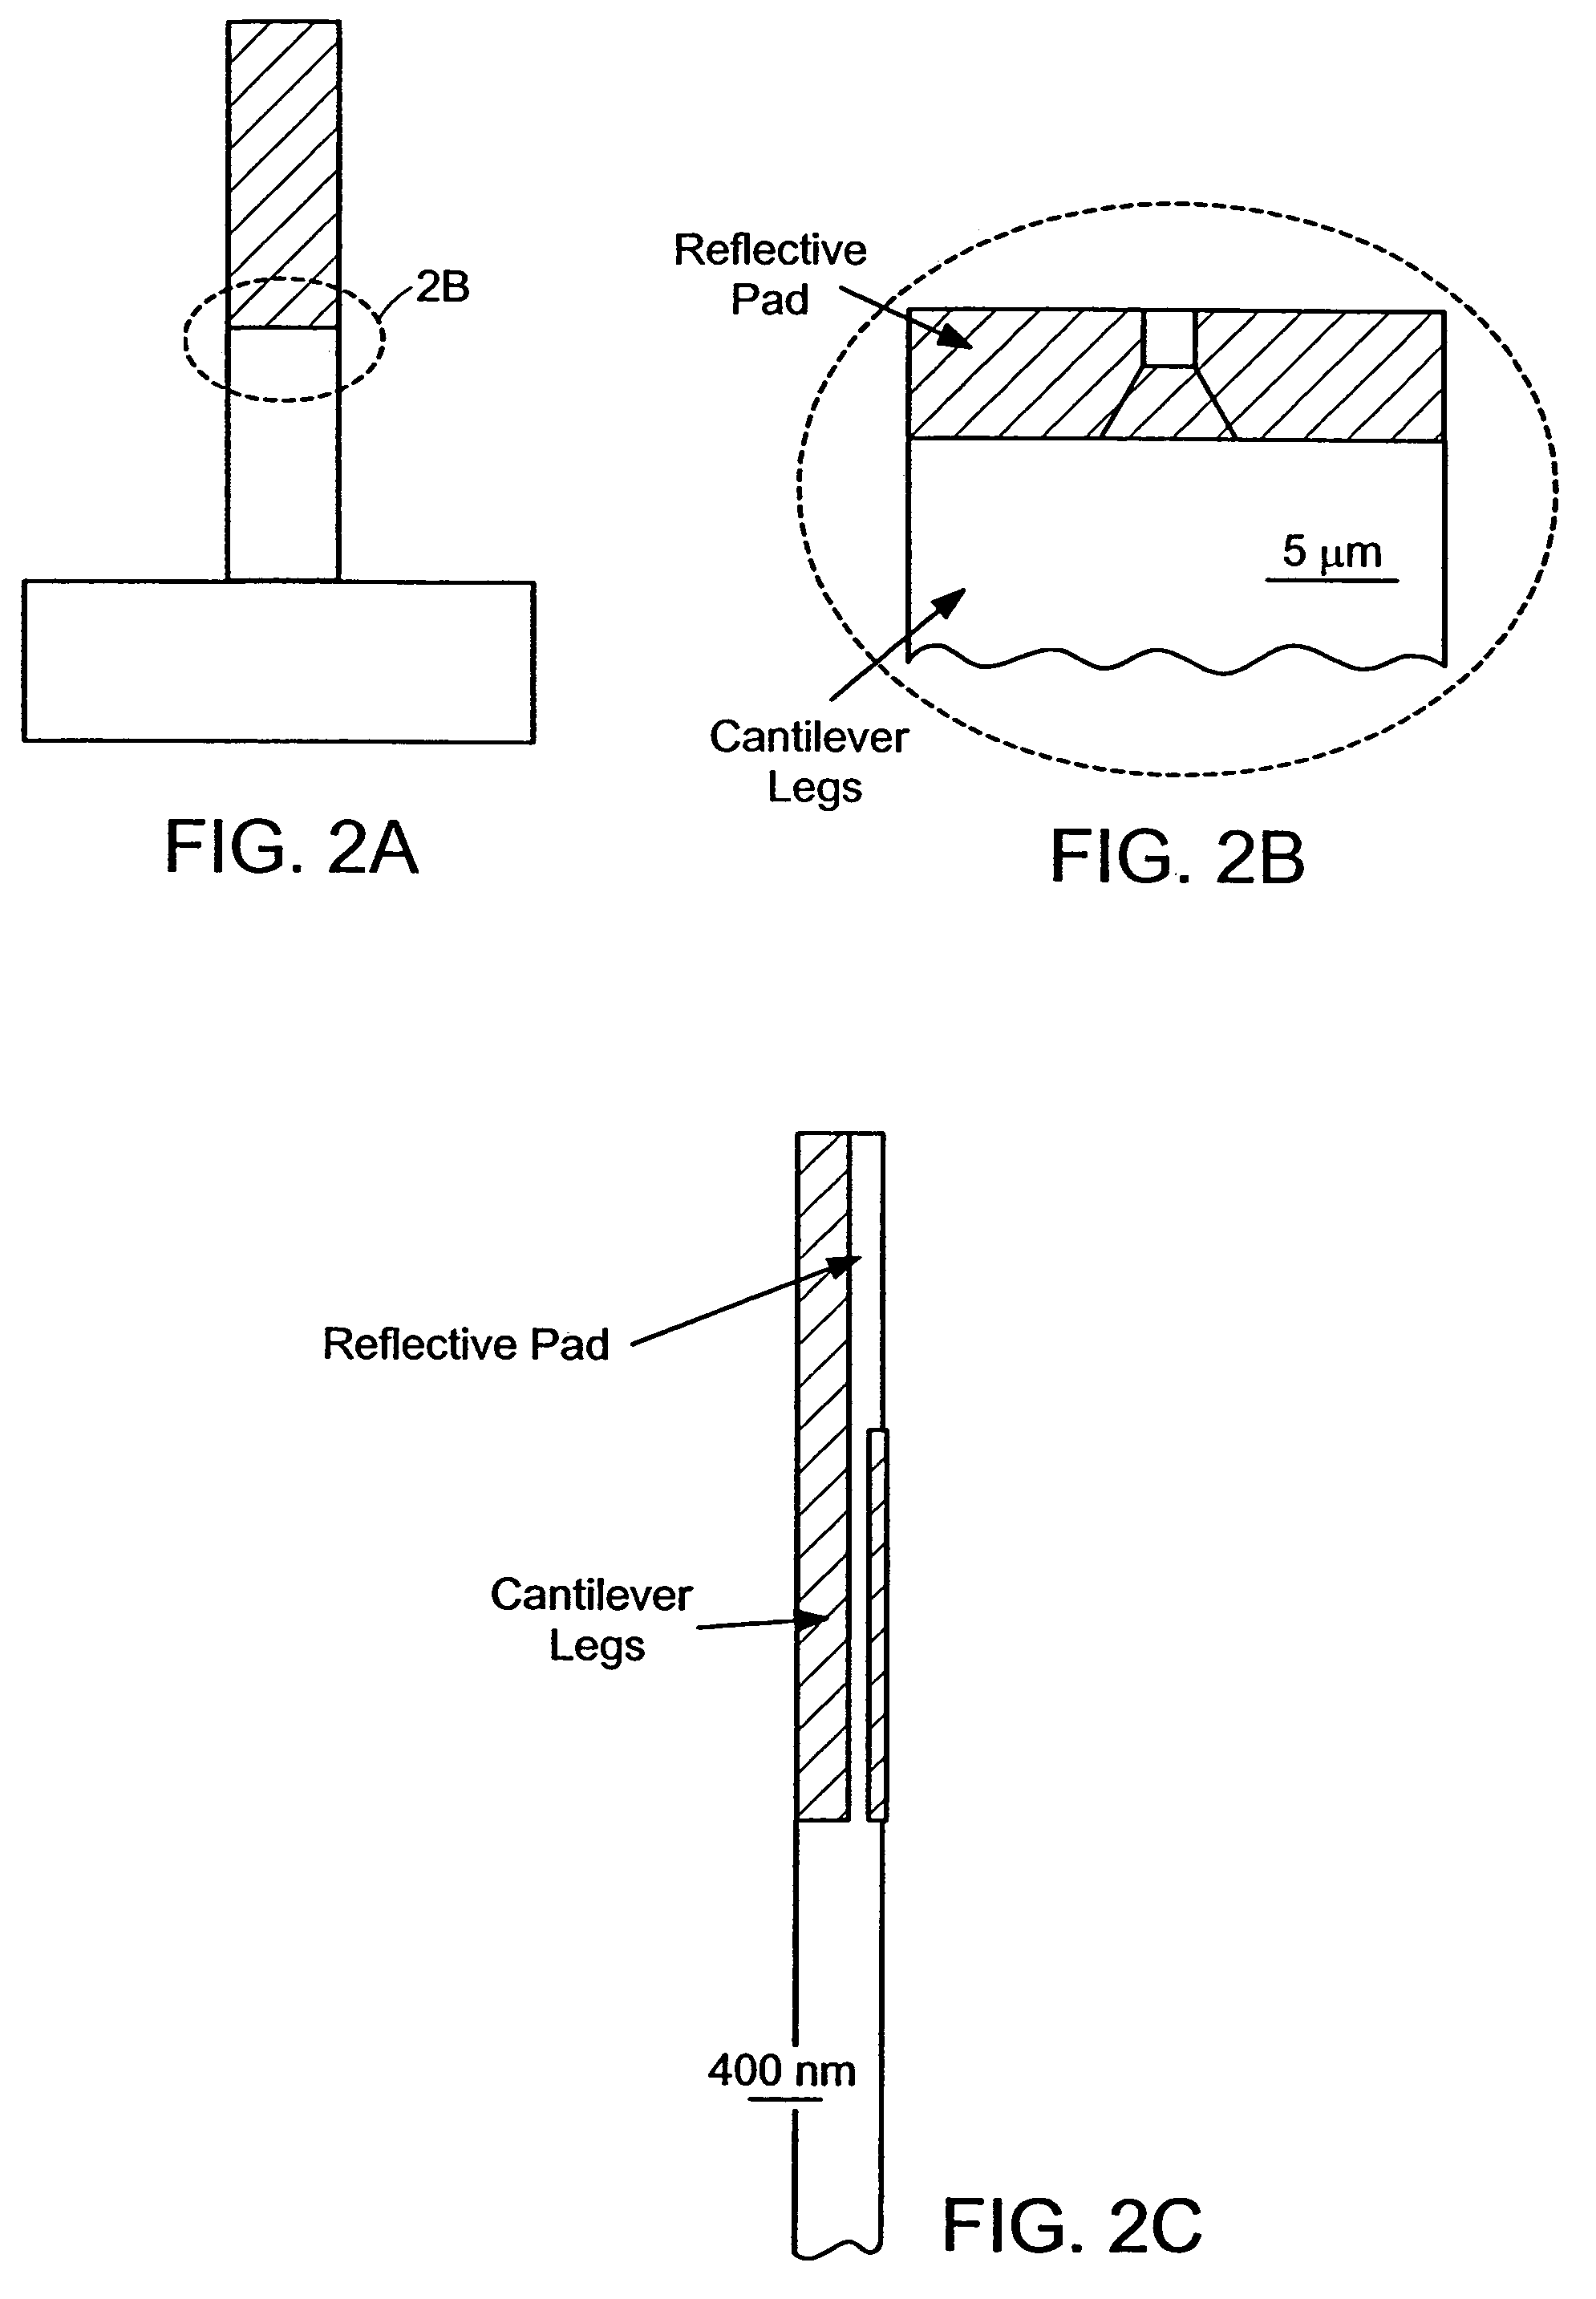 AFM cantilevers and methods for making and using same